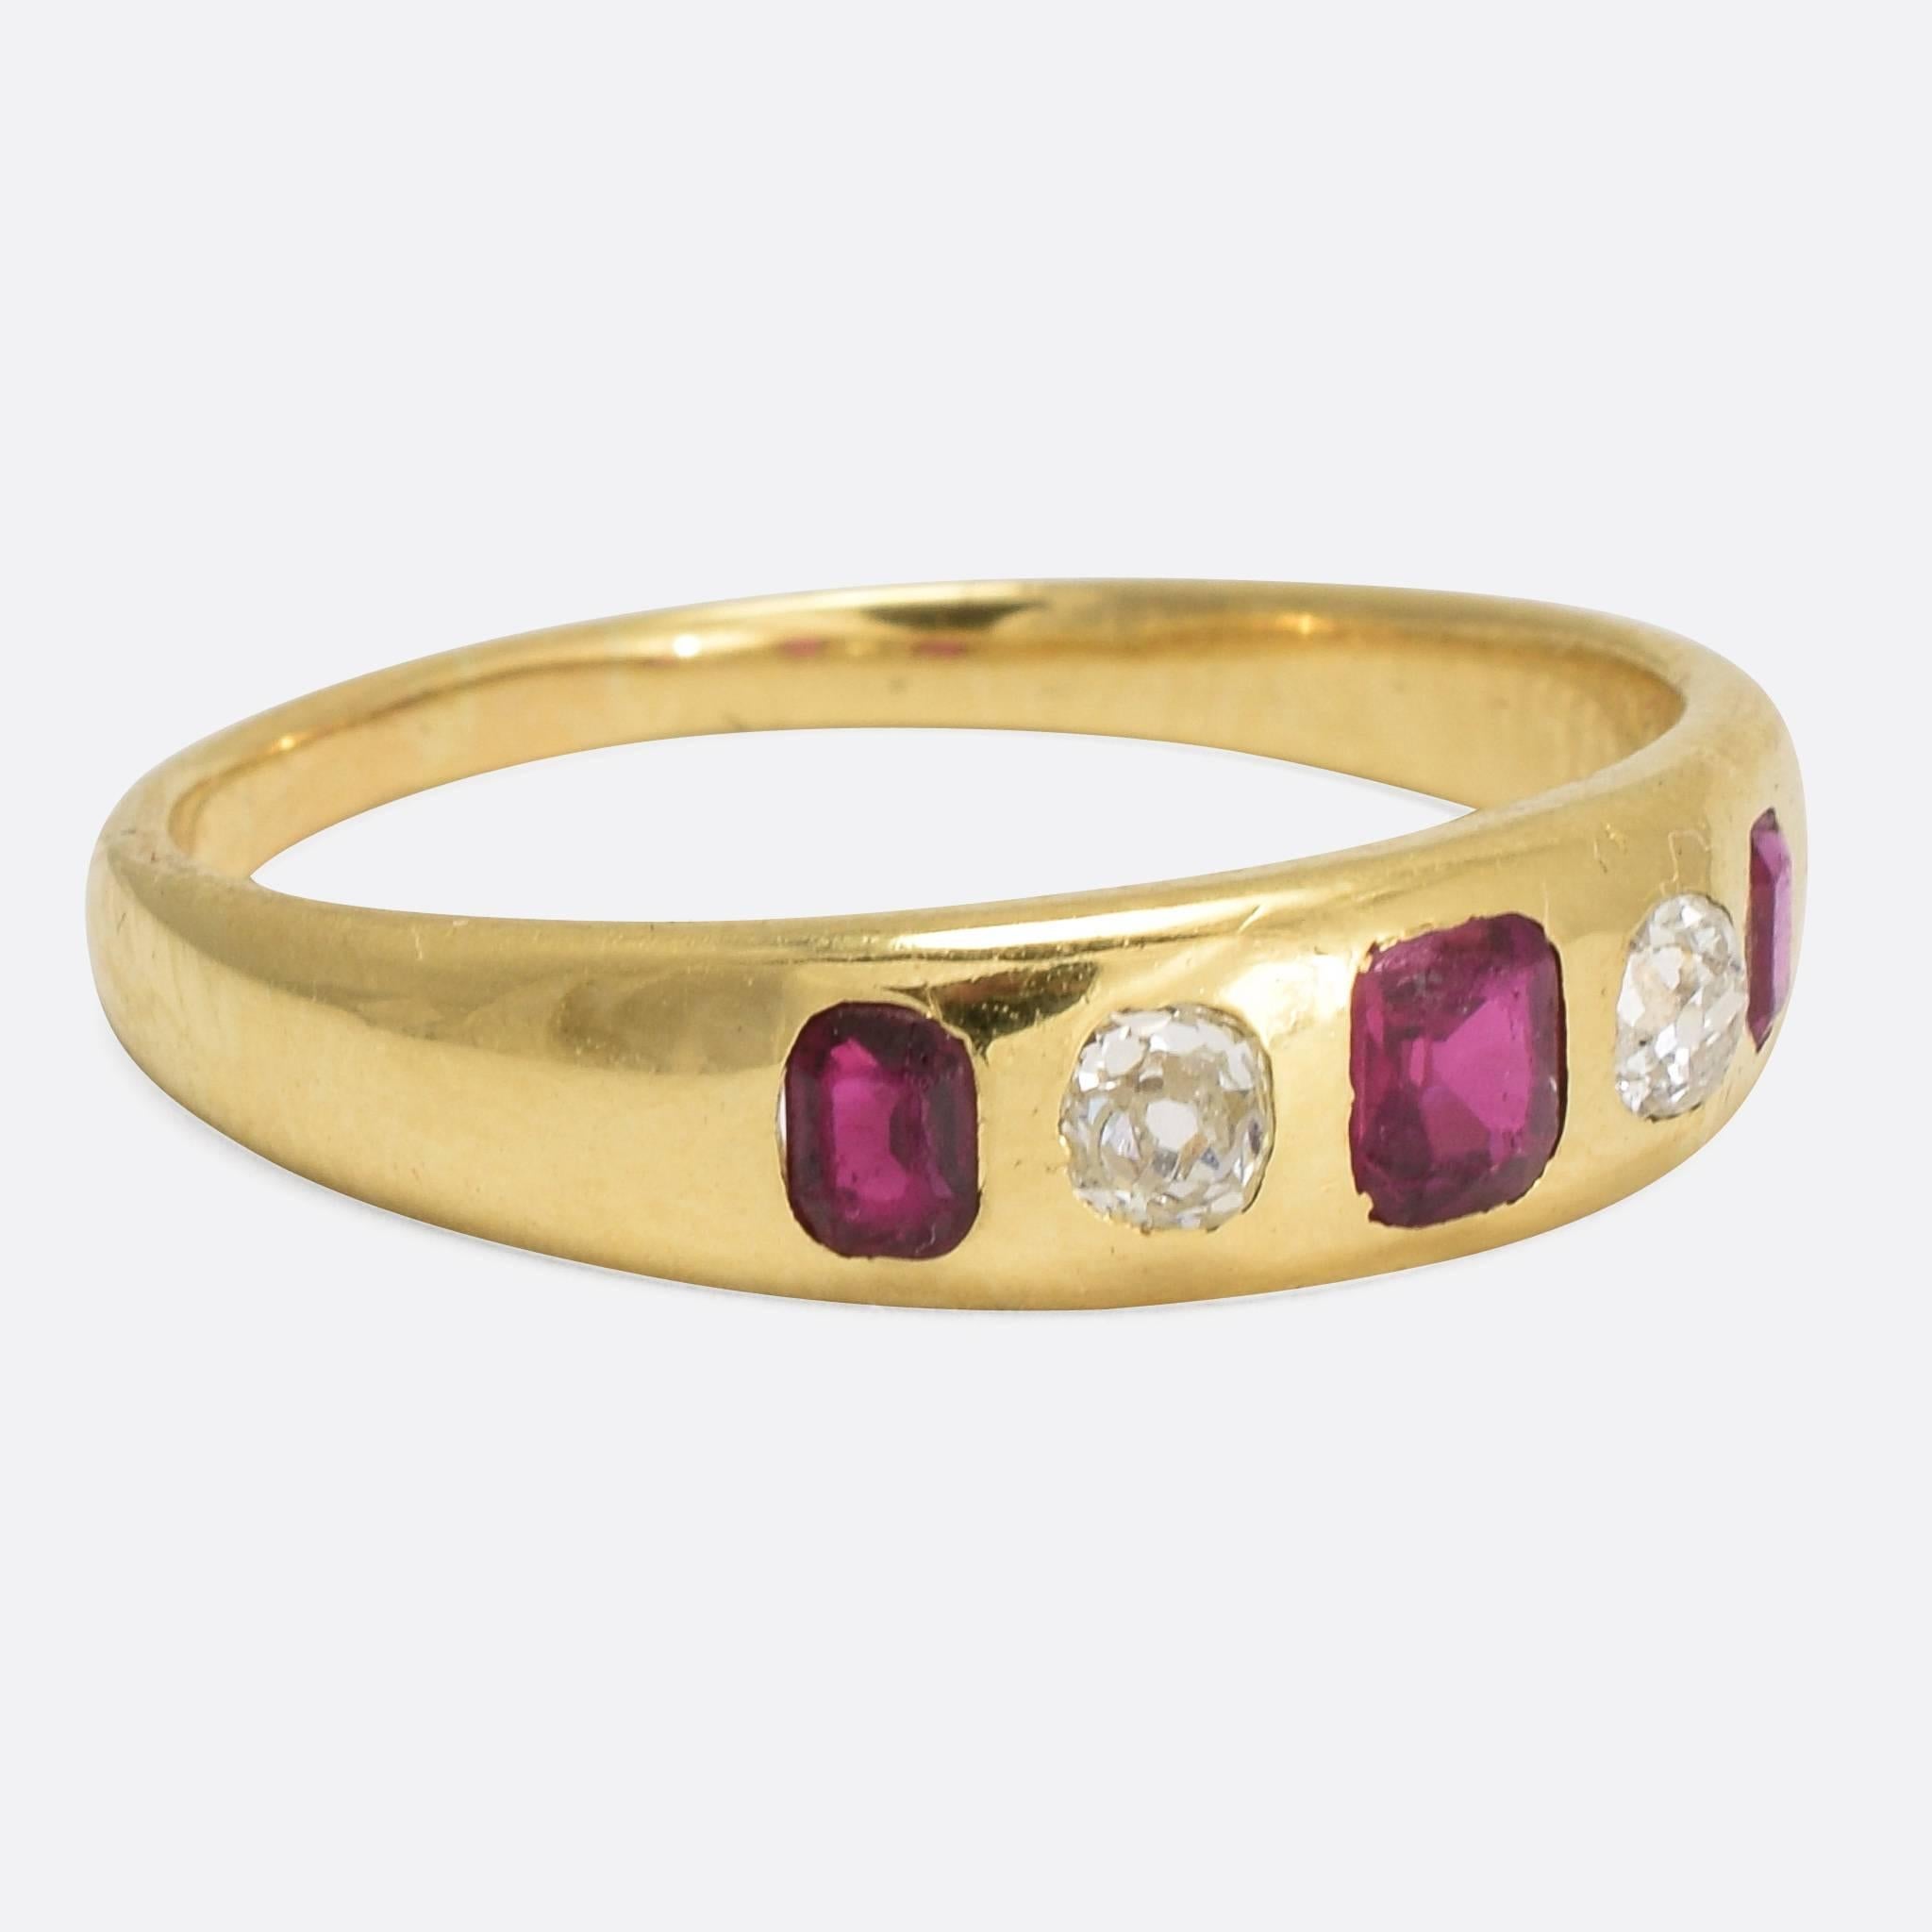 This classic late Victorian gypsy ring is set with three rectangular rubies and two old cut diamonds (total diamond weight approx. 0.36ct). Ideal for stacking, the band gradually widens towards the head, modelled in rich 18k yellow gold throughout.